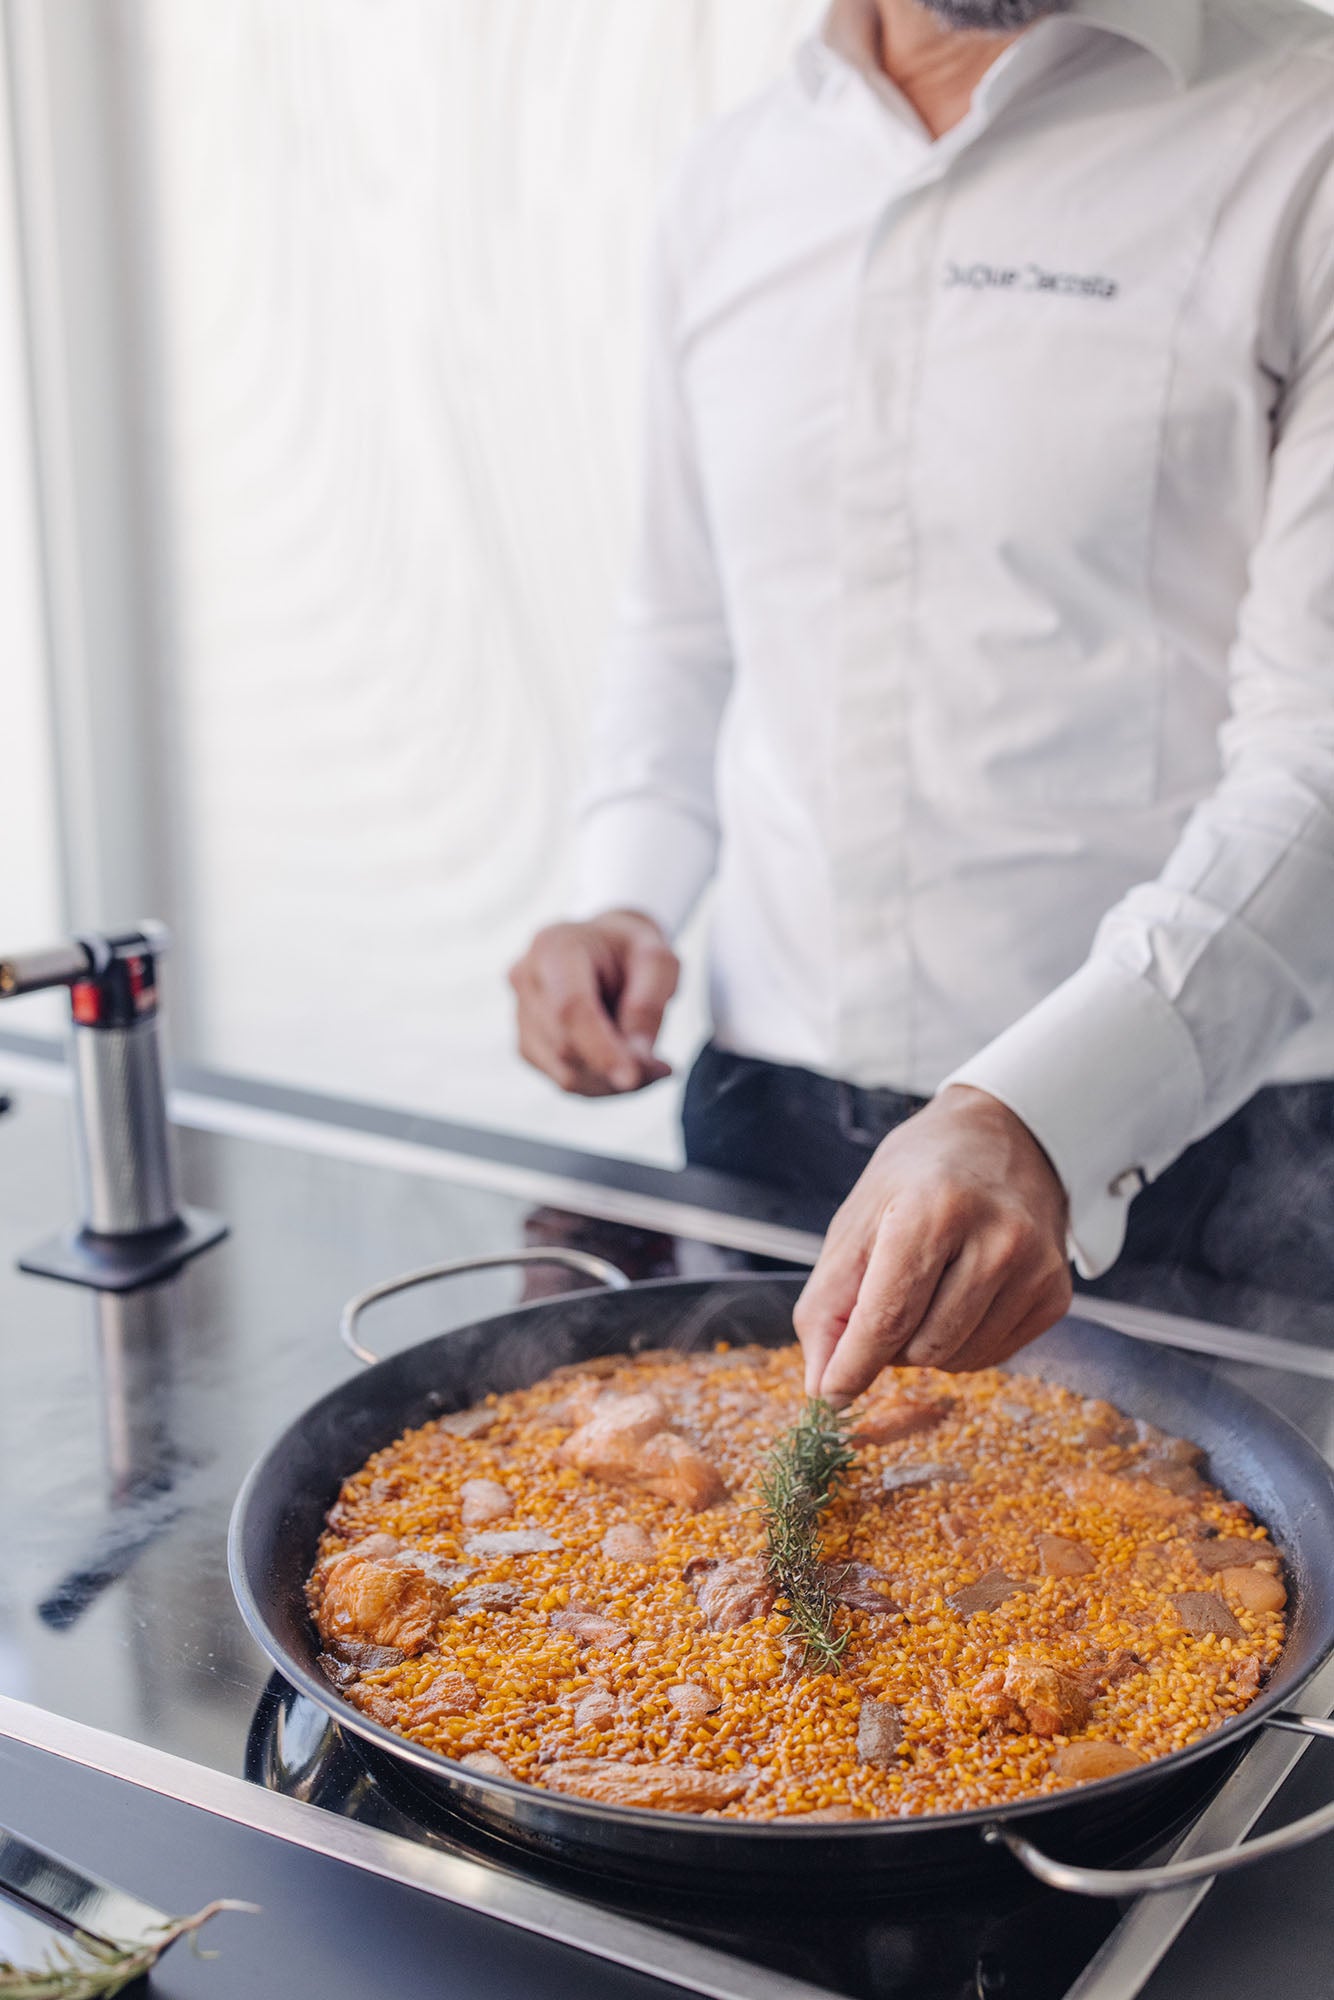 Valencian Paella (for 4 people)